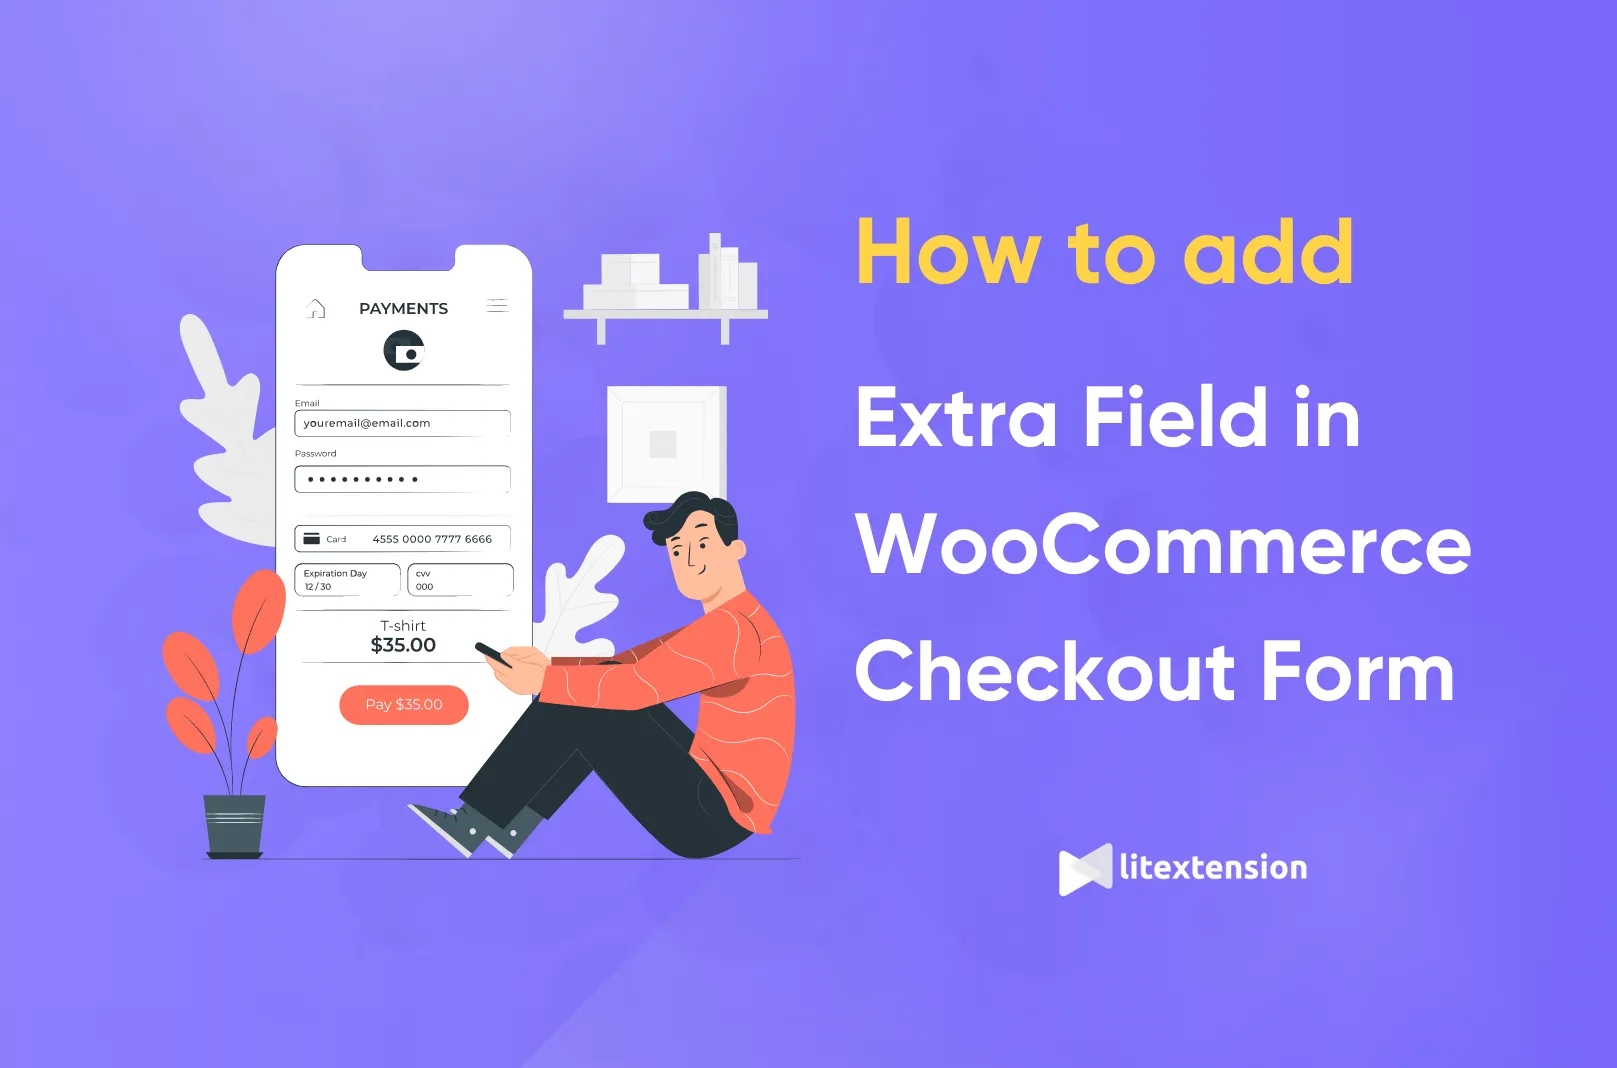 How to Create Seamless WooCommerce Checkout Process